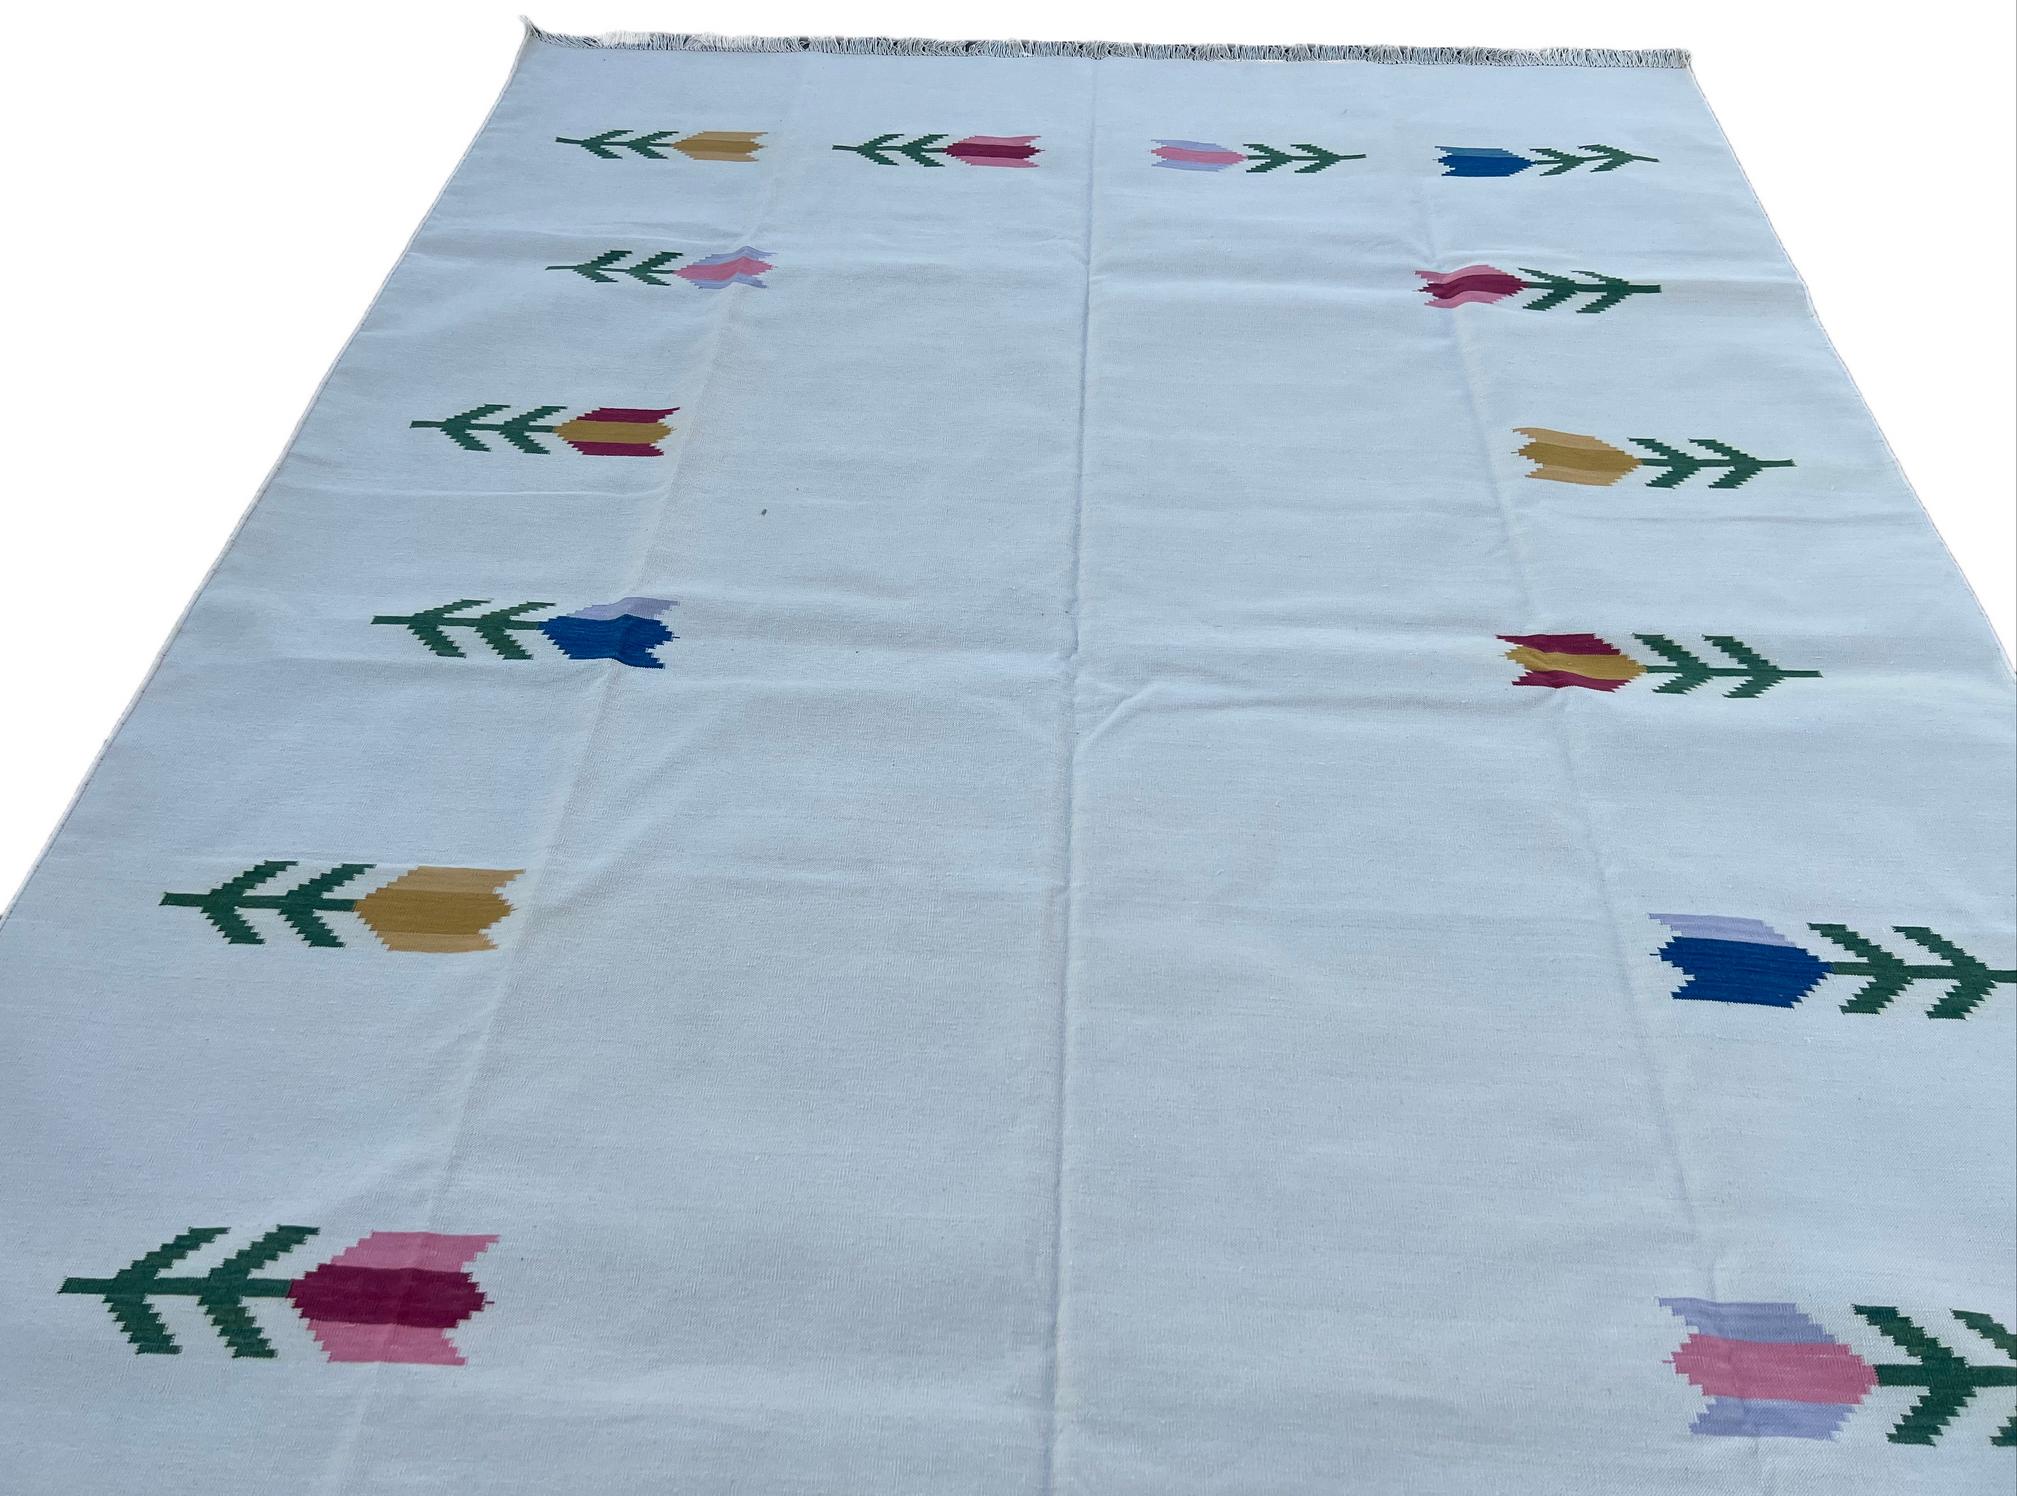 Handmade Cotton Area Flat Weave Rug, White & Green Leaf Patterned Indian Dhurrie In New Condition For Sale In Jaipur, IN